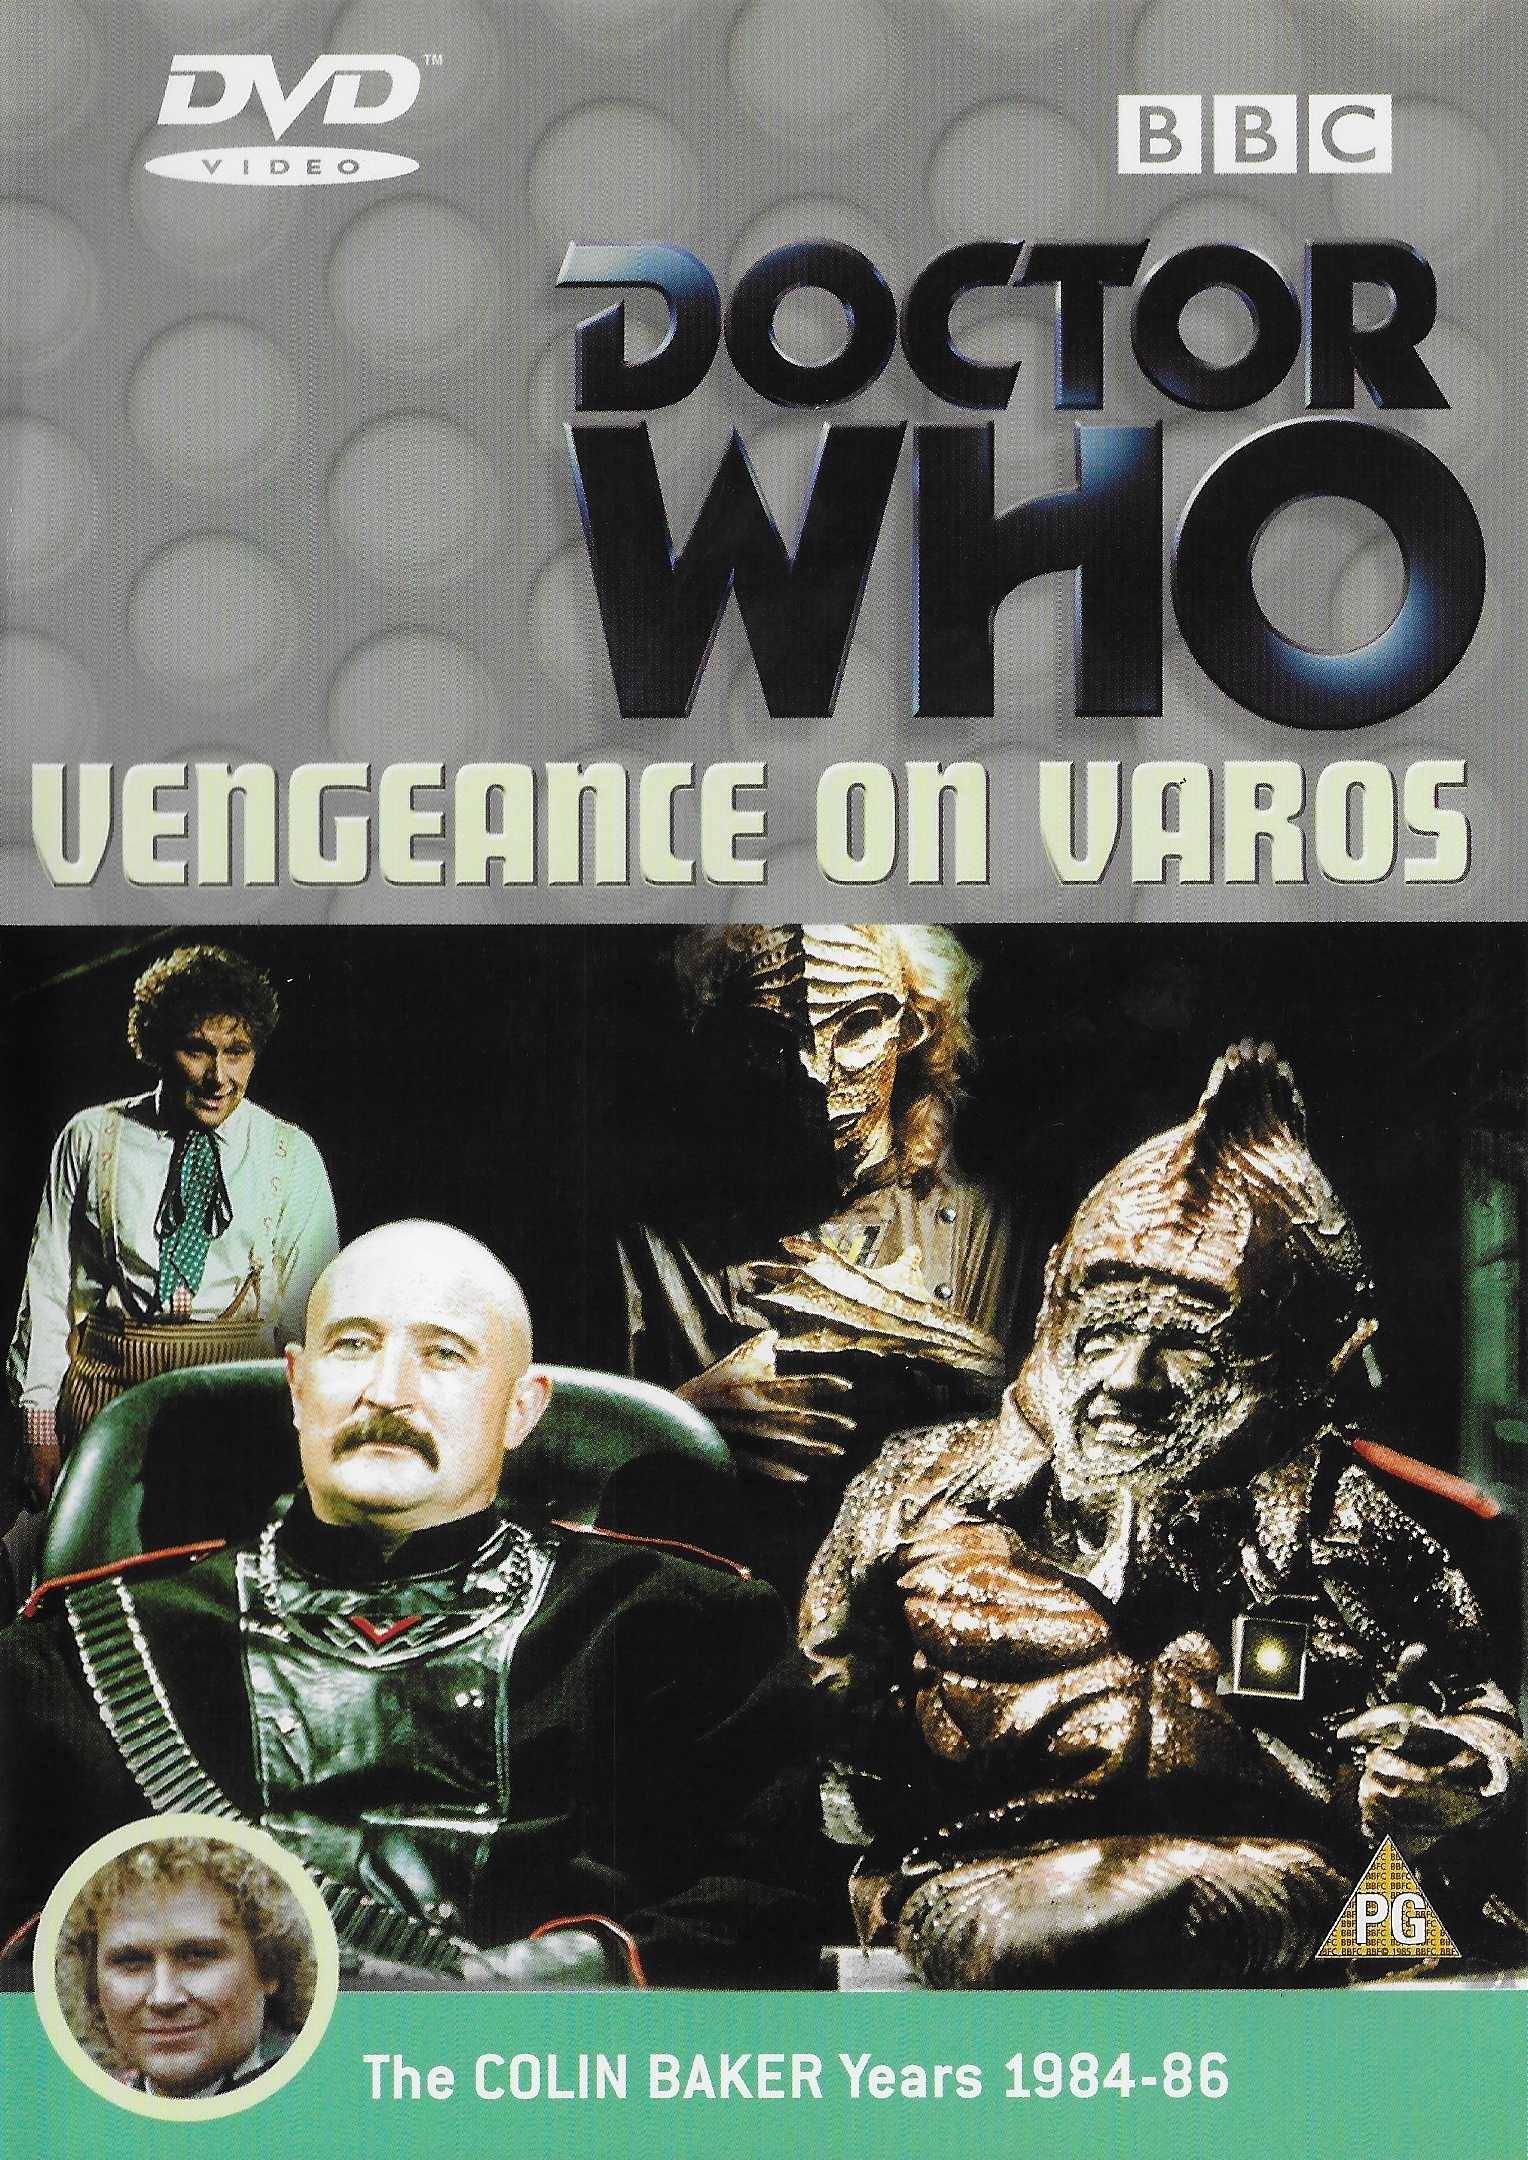 Picture of BBCDVD 1044 Doctor Who - Vengence on Varos by artist Philip Martin from the BBC dvds - Records and Tapes library